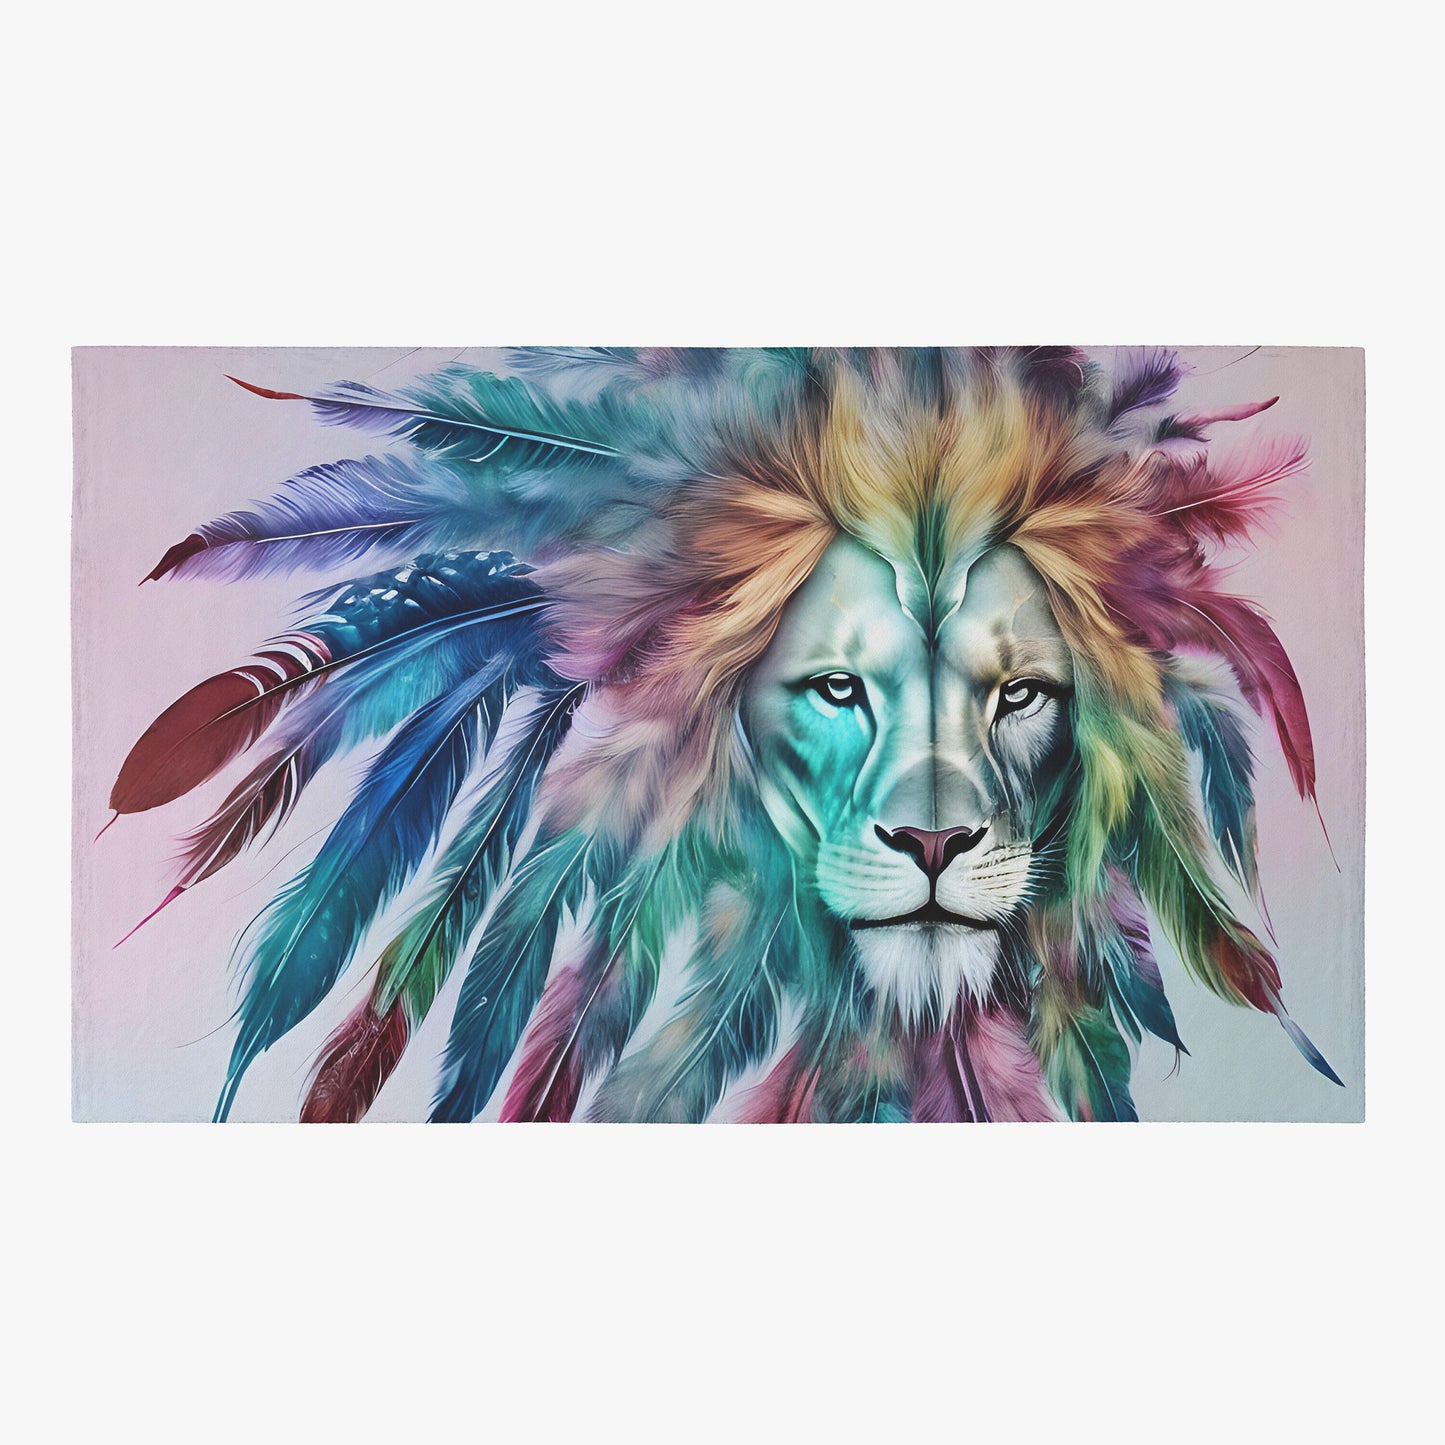 Lion with feathers Rug Lions Floor Mat Lion artwork blue rugs 2x3 4x6 5x7 8x10 large rugs